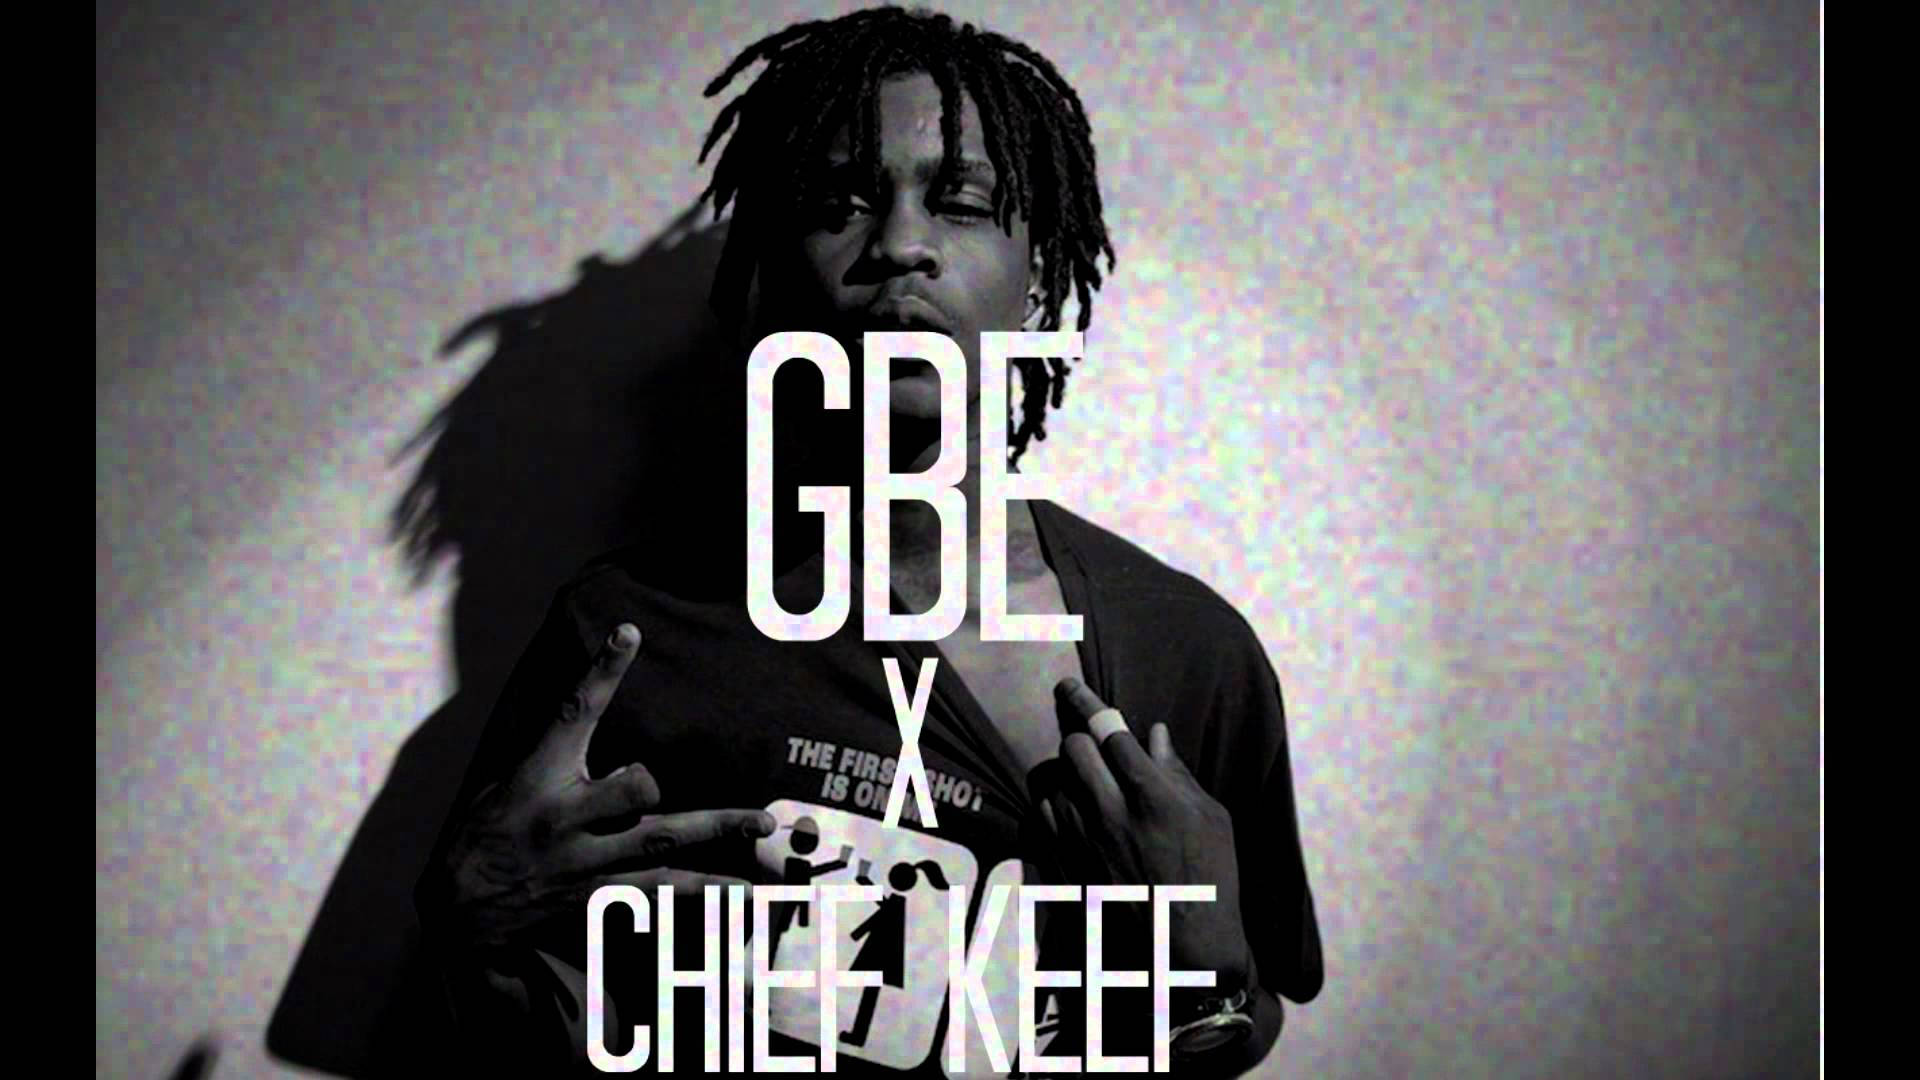 Chief Keef X Gbe Monochrome Poster